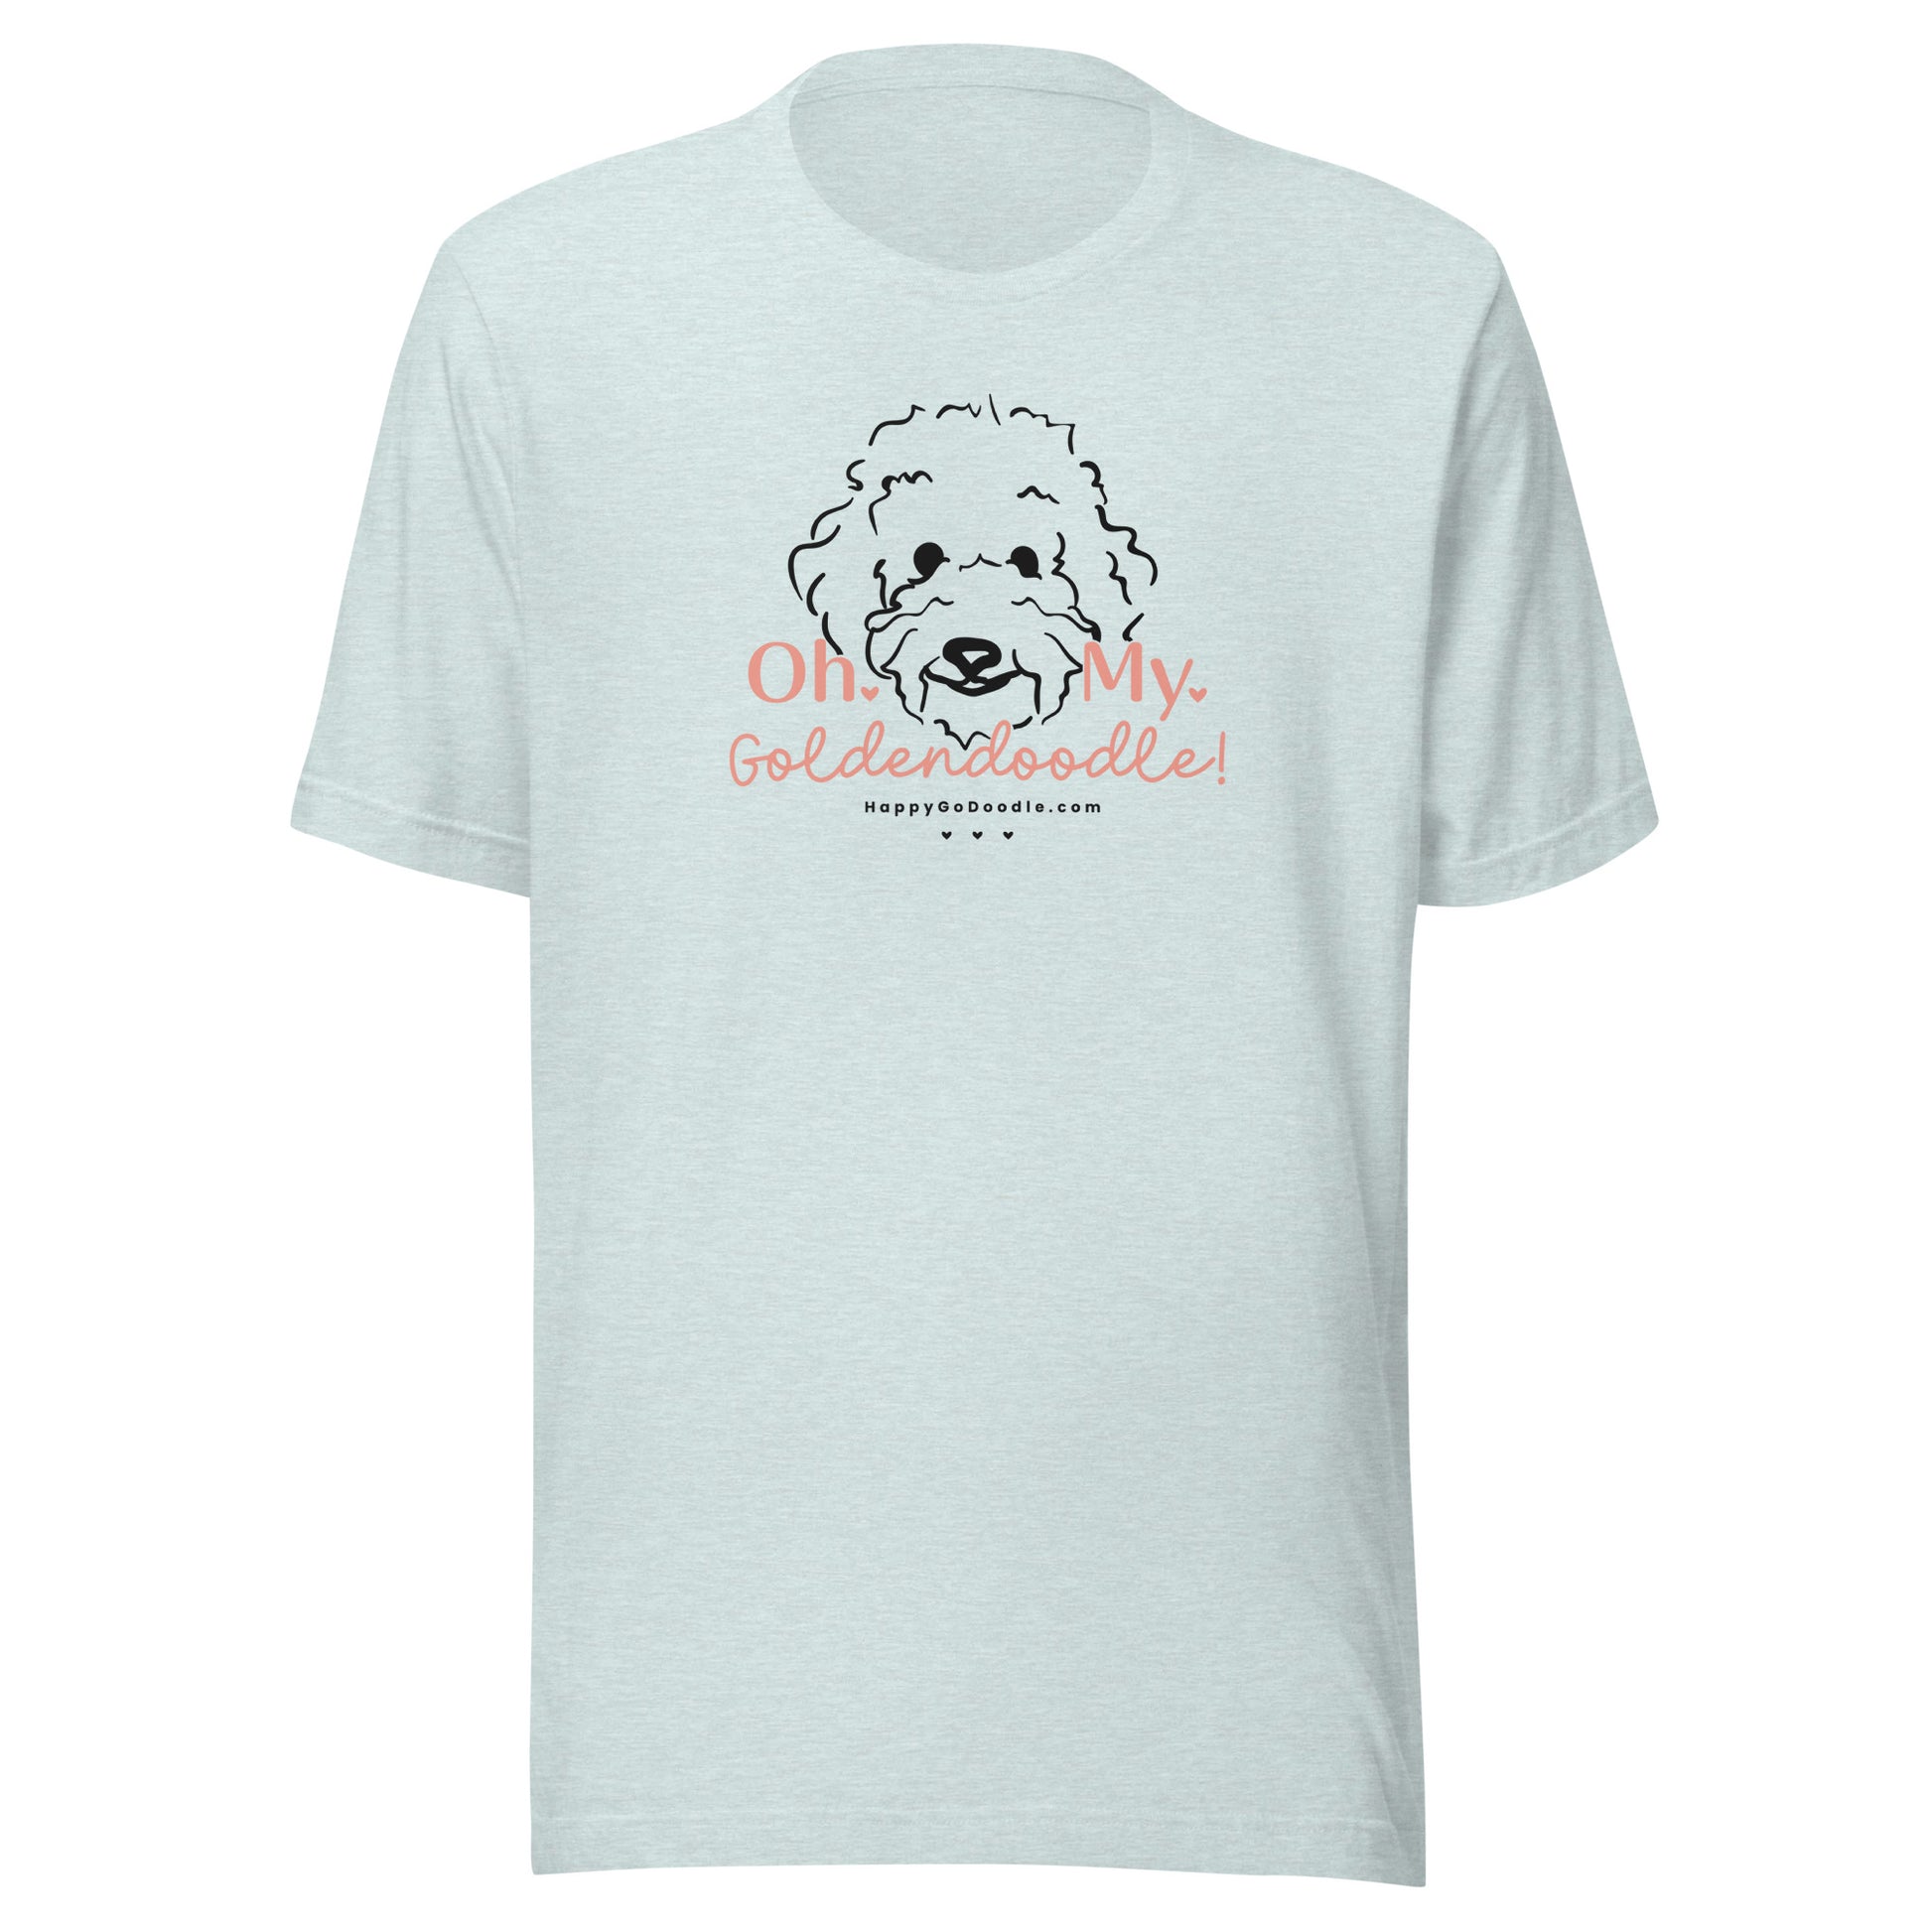 Goldendoodle t-shirt with Goldendoodle dog face and words "Oh My Goldendoodle" in heather prism color